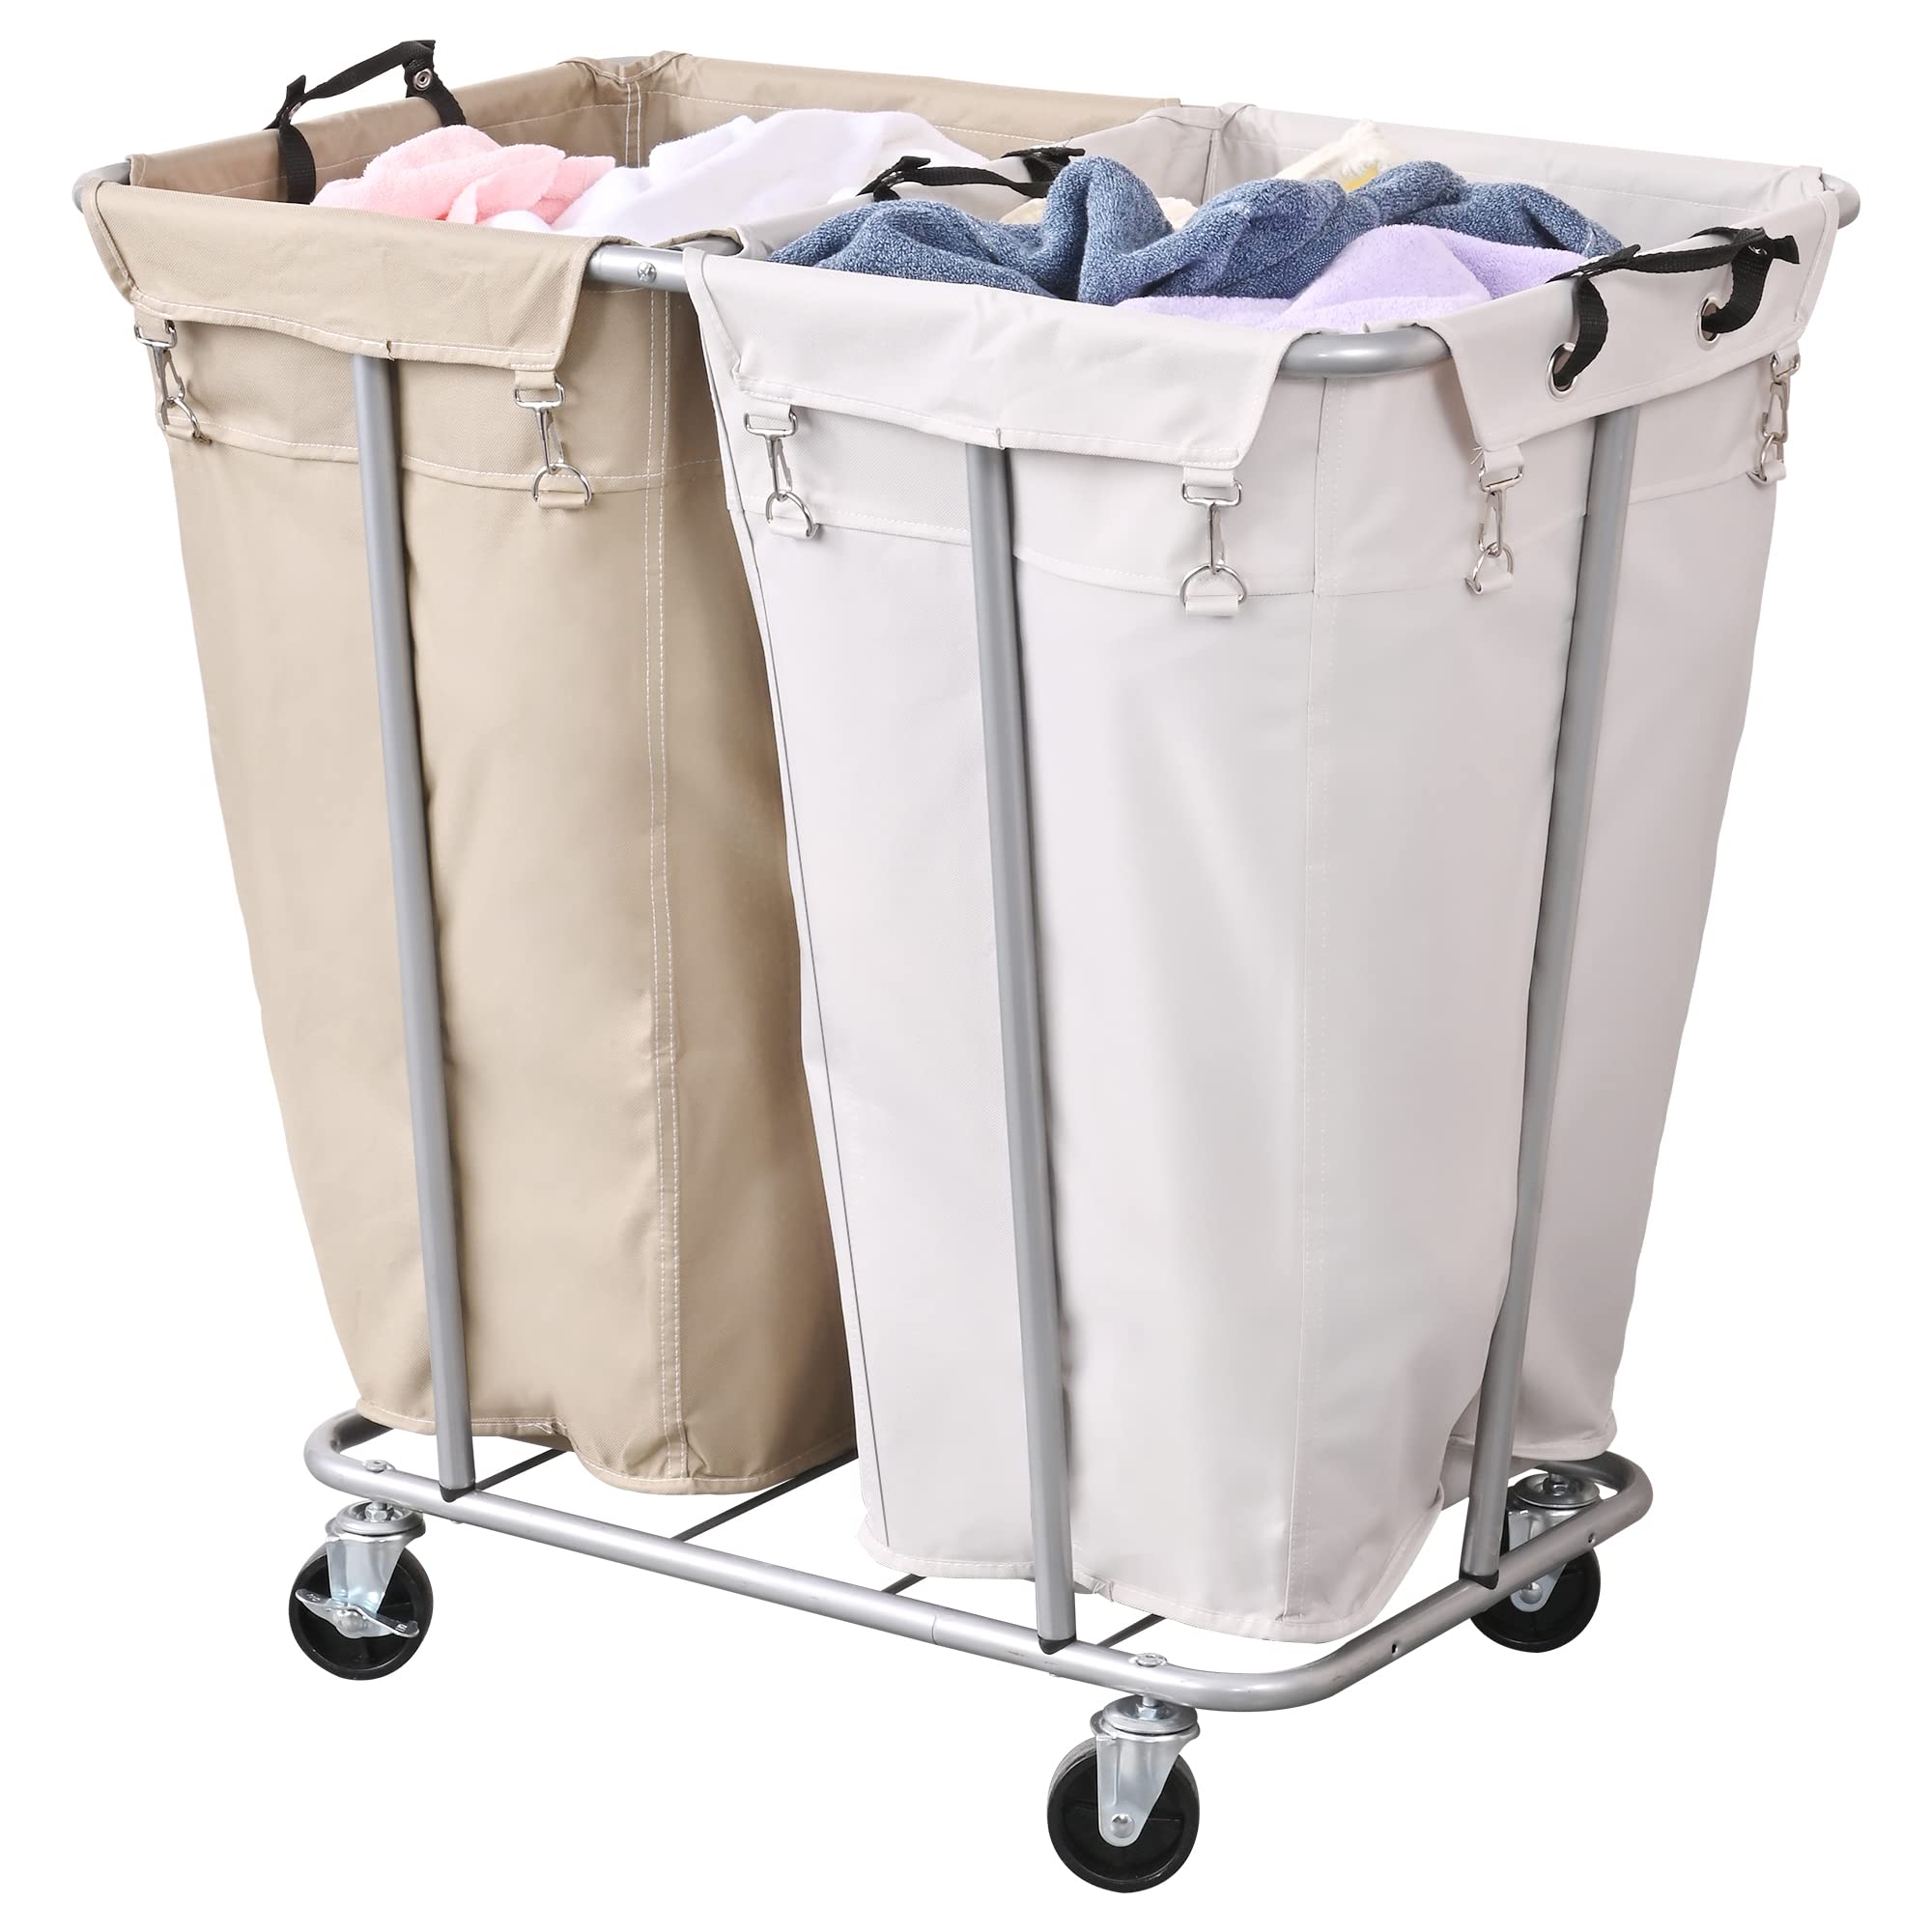 PLKOW Laundry Cart with Wheels 280L Large Laundry Sorter 2 Section for Commercial/Home